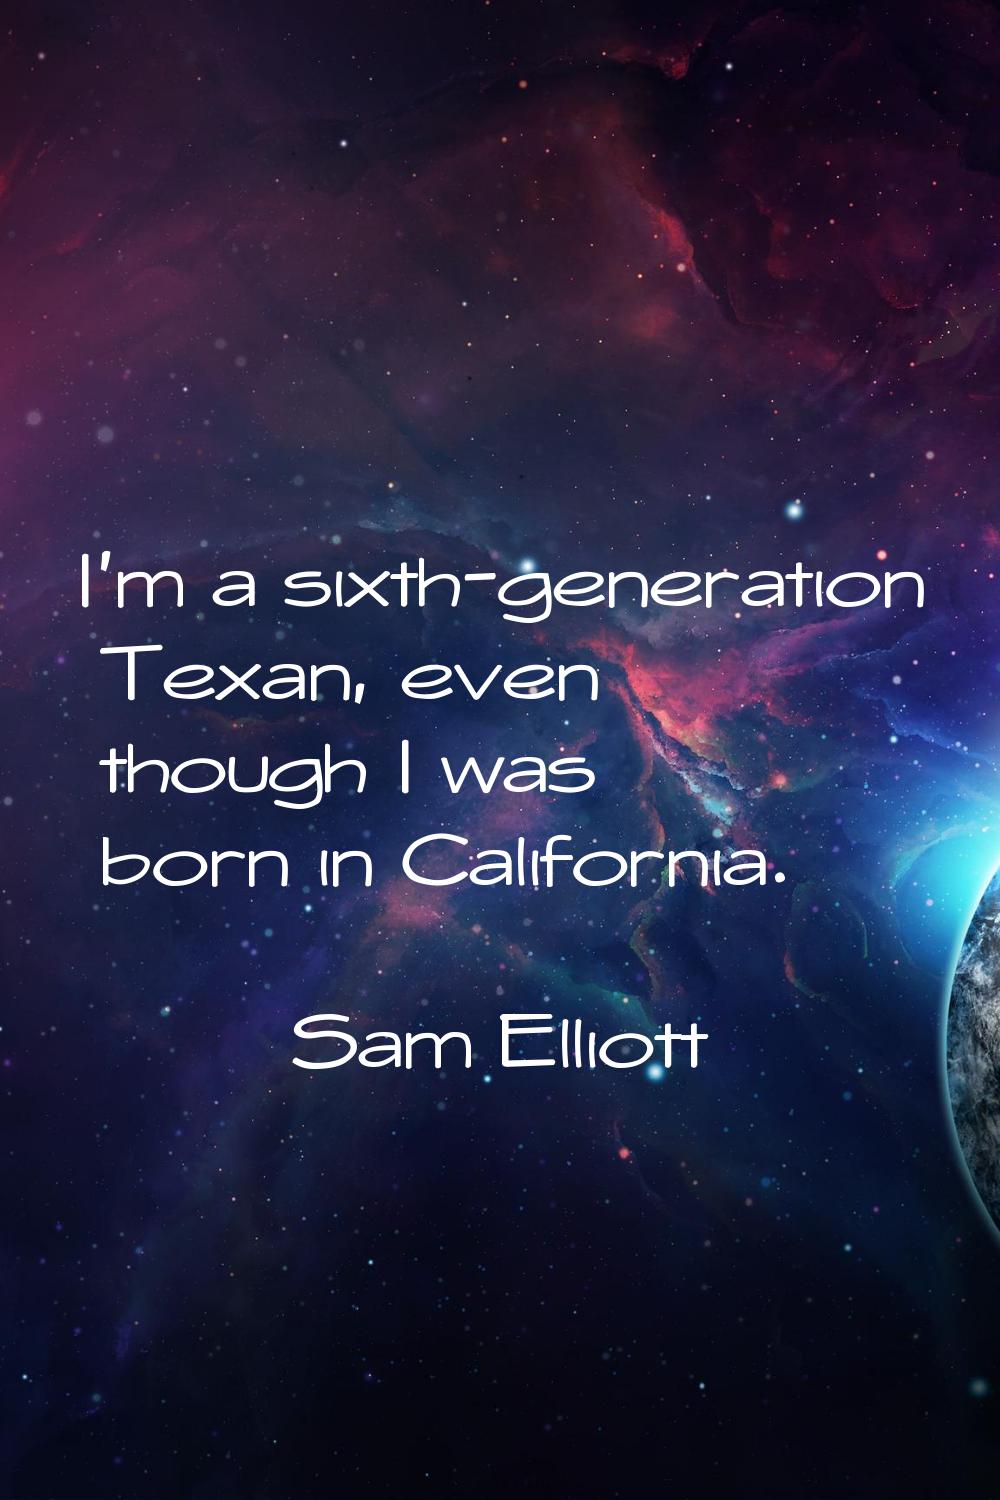 I'm a sixth-generation Texan, even though I was born in California.